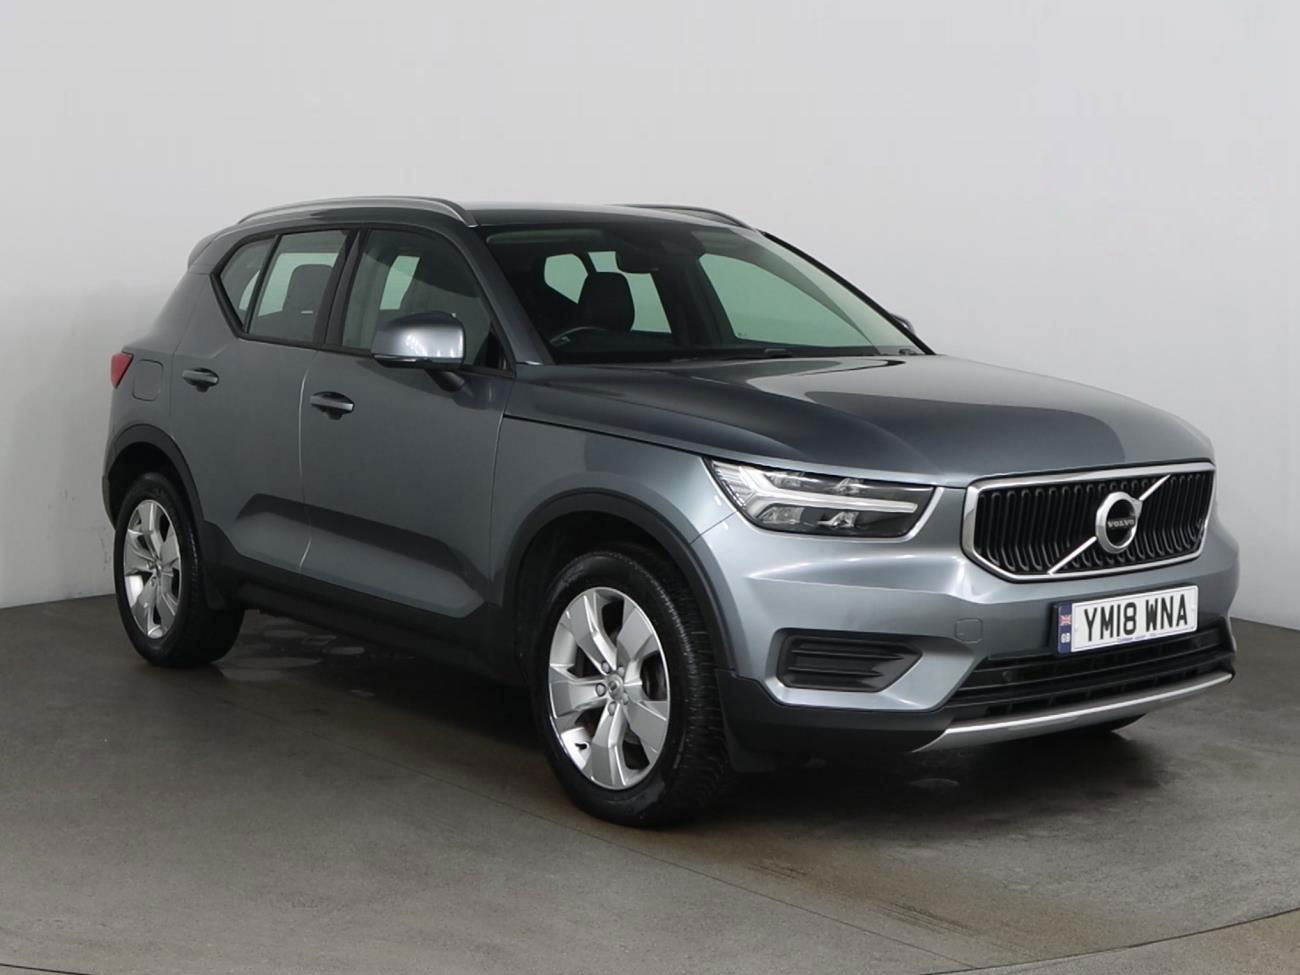 Side view of Volvo XC40 SUV in showroom